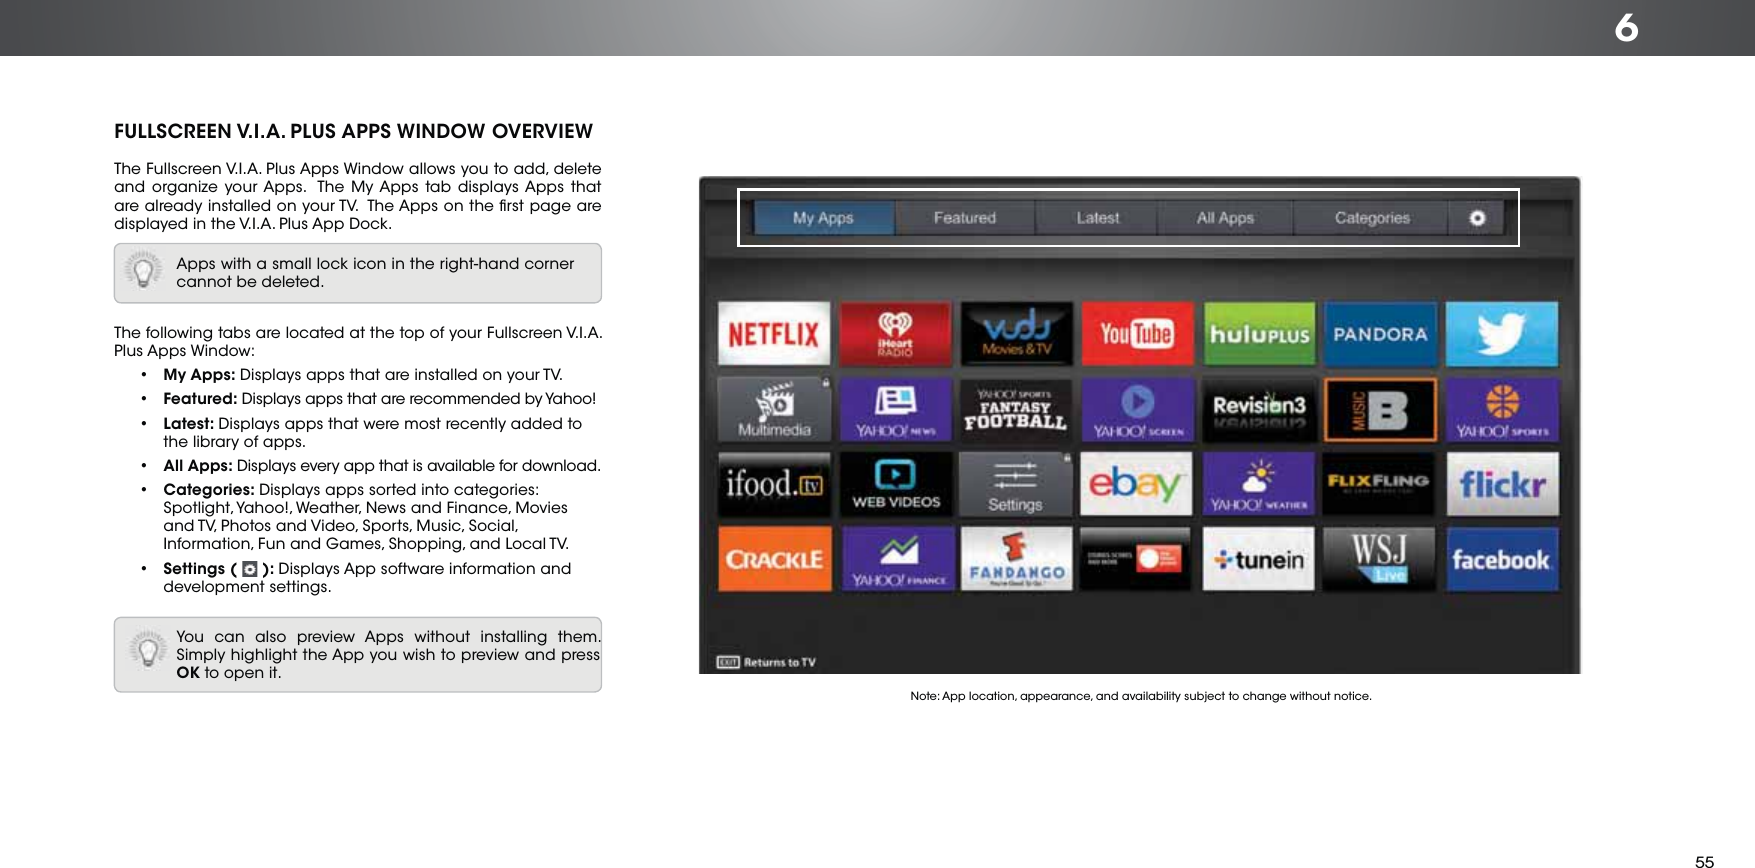 6FULLSCREEN V.I.A. PLUS APPS WINDOW OVERVIEWThe Fullscreen V.I.A. Plus Apps Window allows you to add, delete and organize your Apps.  The My Apps tab displays Apps that are already installed on your TV.  The Apps on the ﬁrst page are displayed in the V.I.A. Plus App Dock. The following tabs are located at the top of your Fullscreen V.I.A. Plus Apps Window:• My Apps: Displays apps that are installed on your TV.• Featured: Displays apps that are recommended by Yahoo!• Latest: Displays apps that were most recently added to the library of apps.• All Apps: Displays every app that is available for download.• Categories: Displays apps sorted into categories: Spotlight, Yahoo!, Weather, News and Finance, Movies and TV, Photos and Video, Sports, Music, Social, Information, Fun and Games, Shopping, and Local TV.• Settings (   ): Displays App software information and development settings.Apps with a small lock icon in the right-hand corner cannot be deleted.You can also preview Apps without installing them. Simply highlight the App you wish to preview and press OK to open it. Note: App location, appearance, and availability subject to change without notice.55